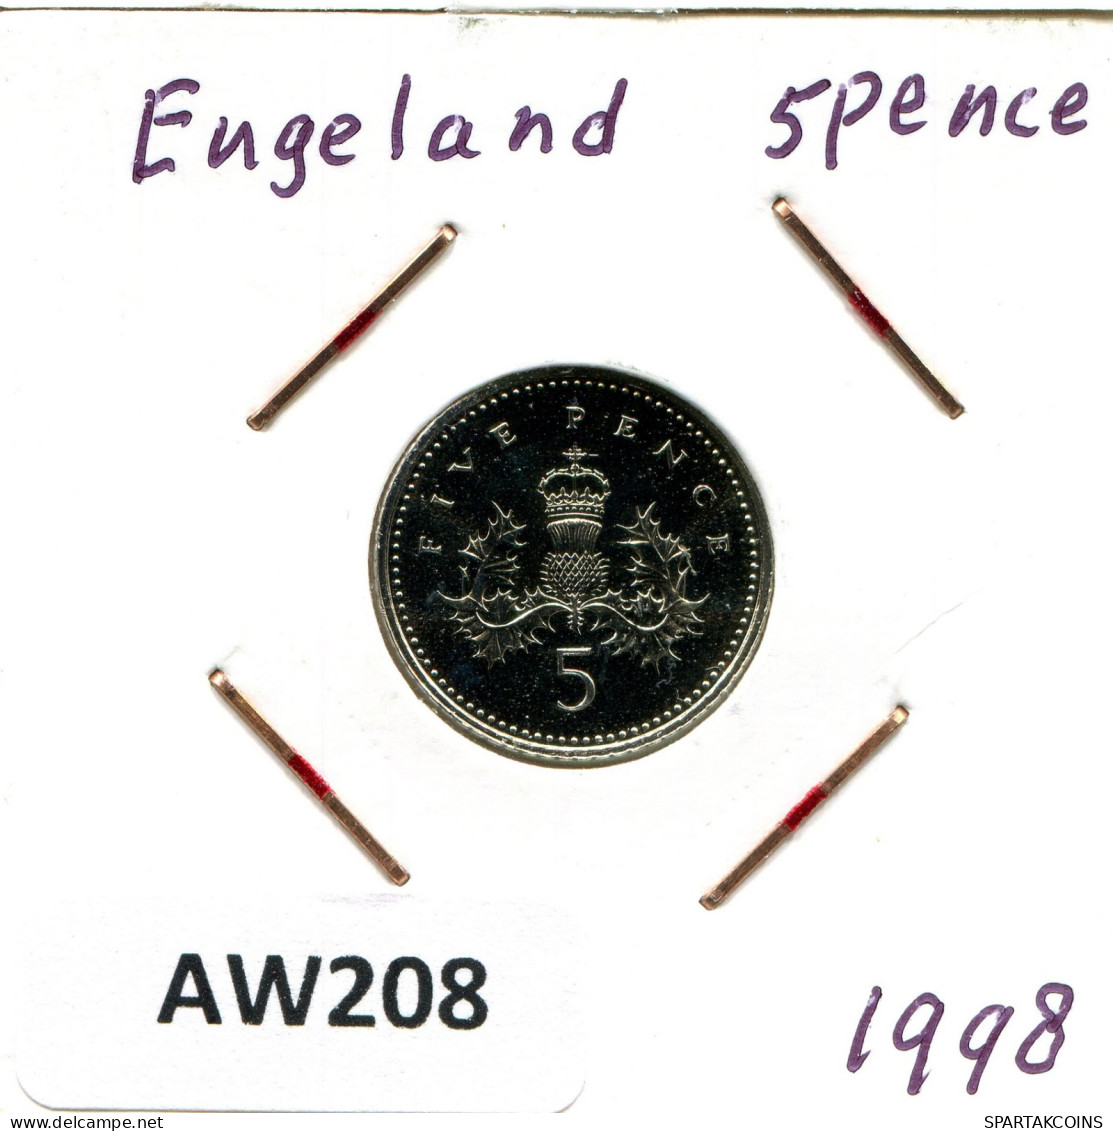 5 PENCE 1998 UK GROßBRITANNIEN GREAT BRITAIN Münze #AW208.D.A - 5 Pence & 5 New Pence